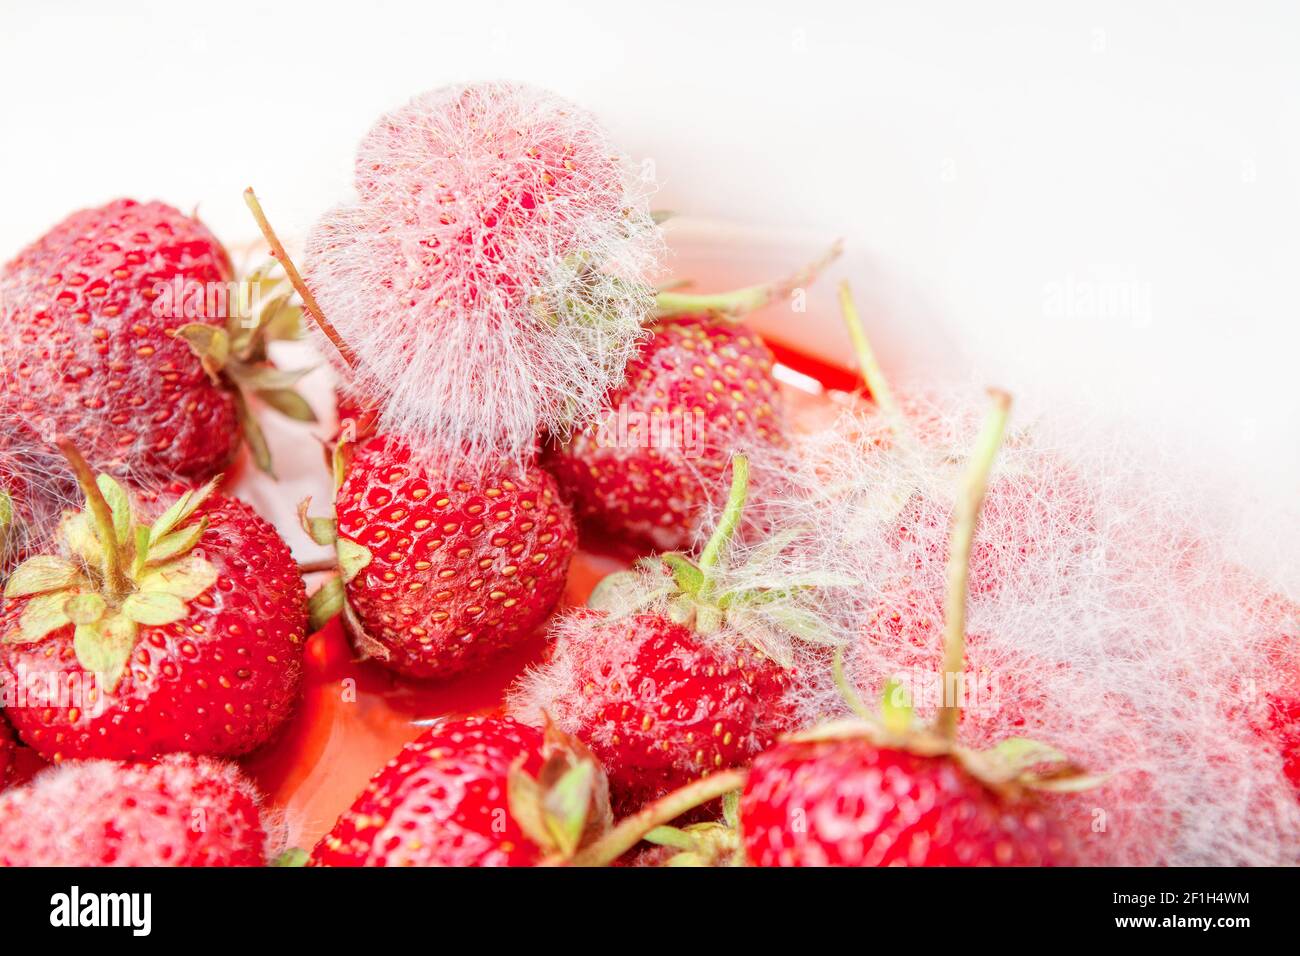 Strawberry with mold stock image. Image of culture, drink - 80301753